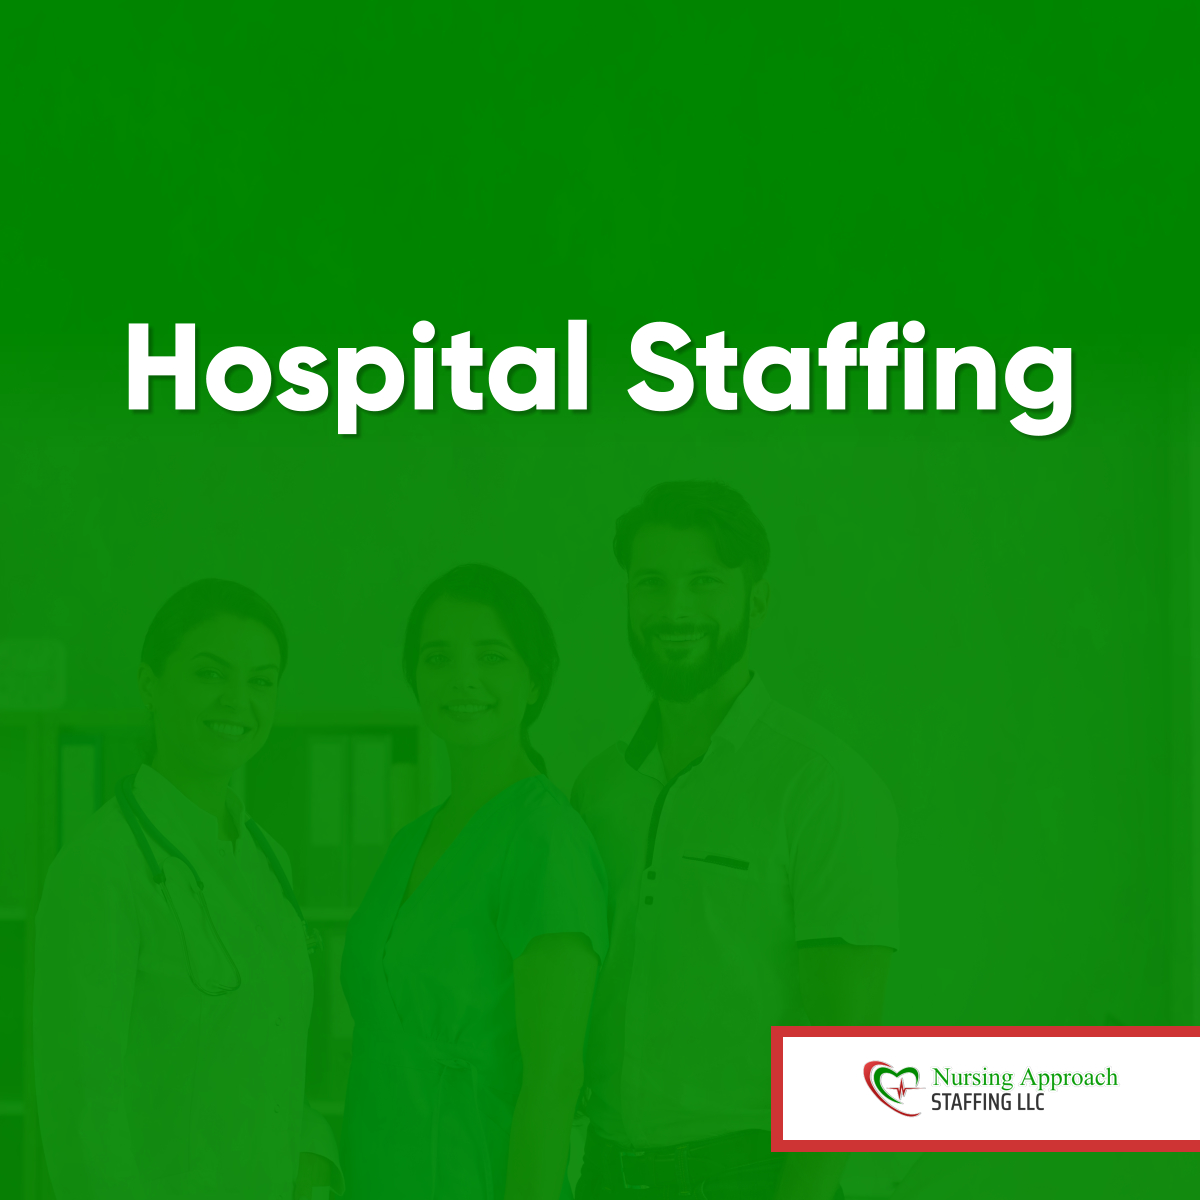 If you are looking for someone to join your team of professionals in your hospital, you have come to the perfect place. We can provide you with competent and experienced professionals.

#HealthcareStaffing #PhiladelphiaPA #HospitalStaffing